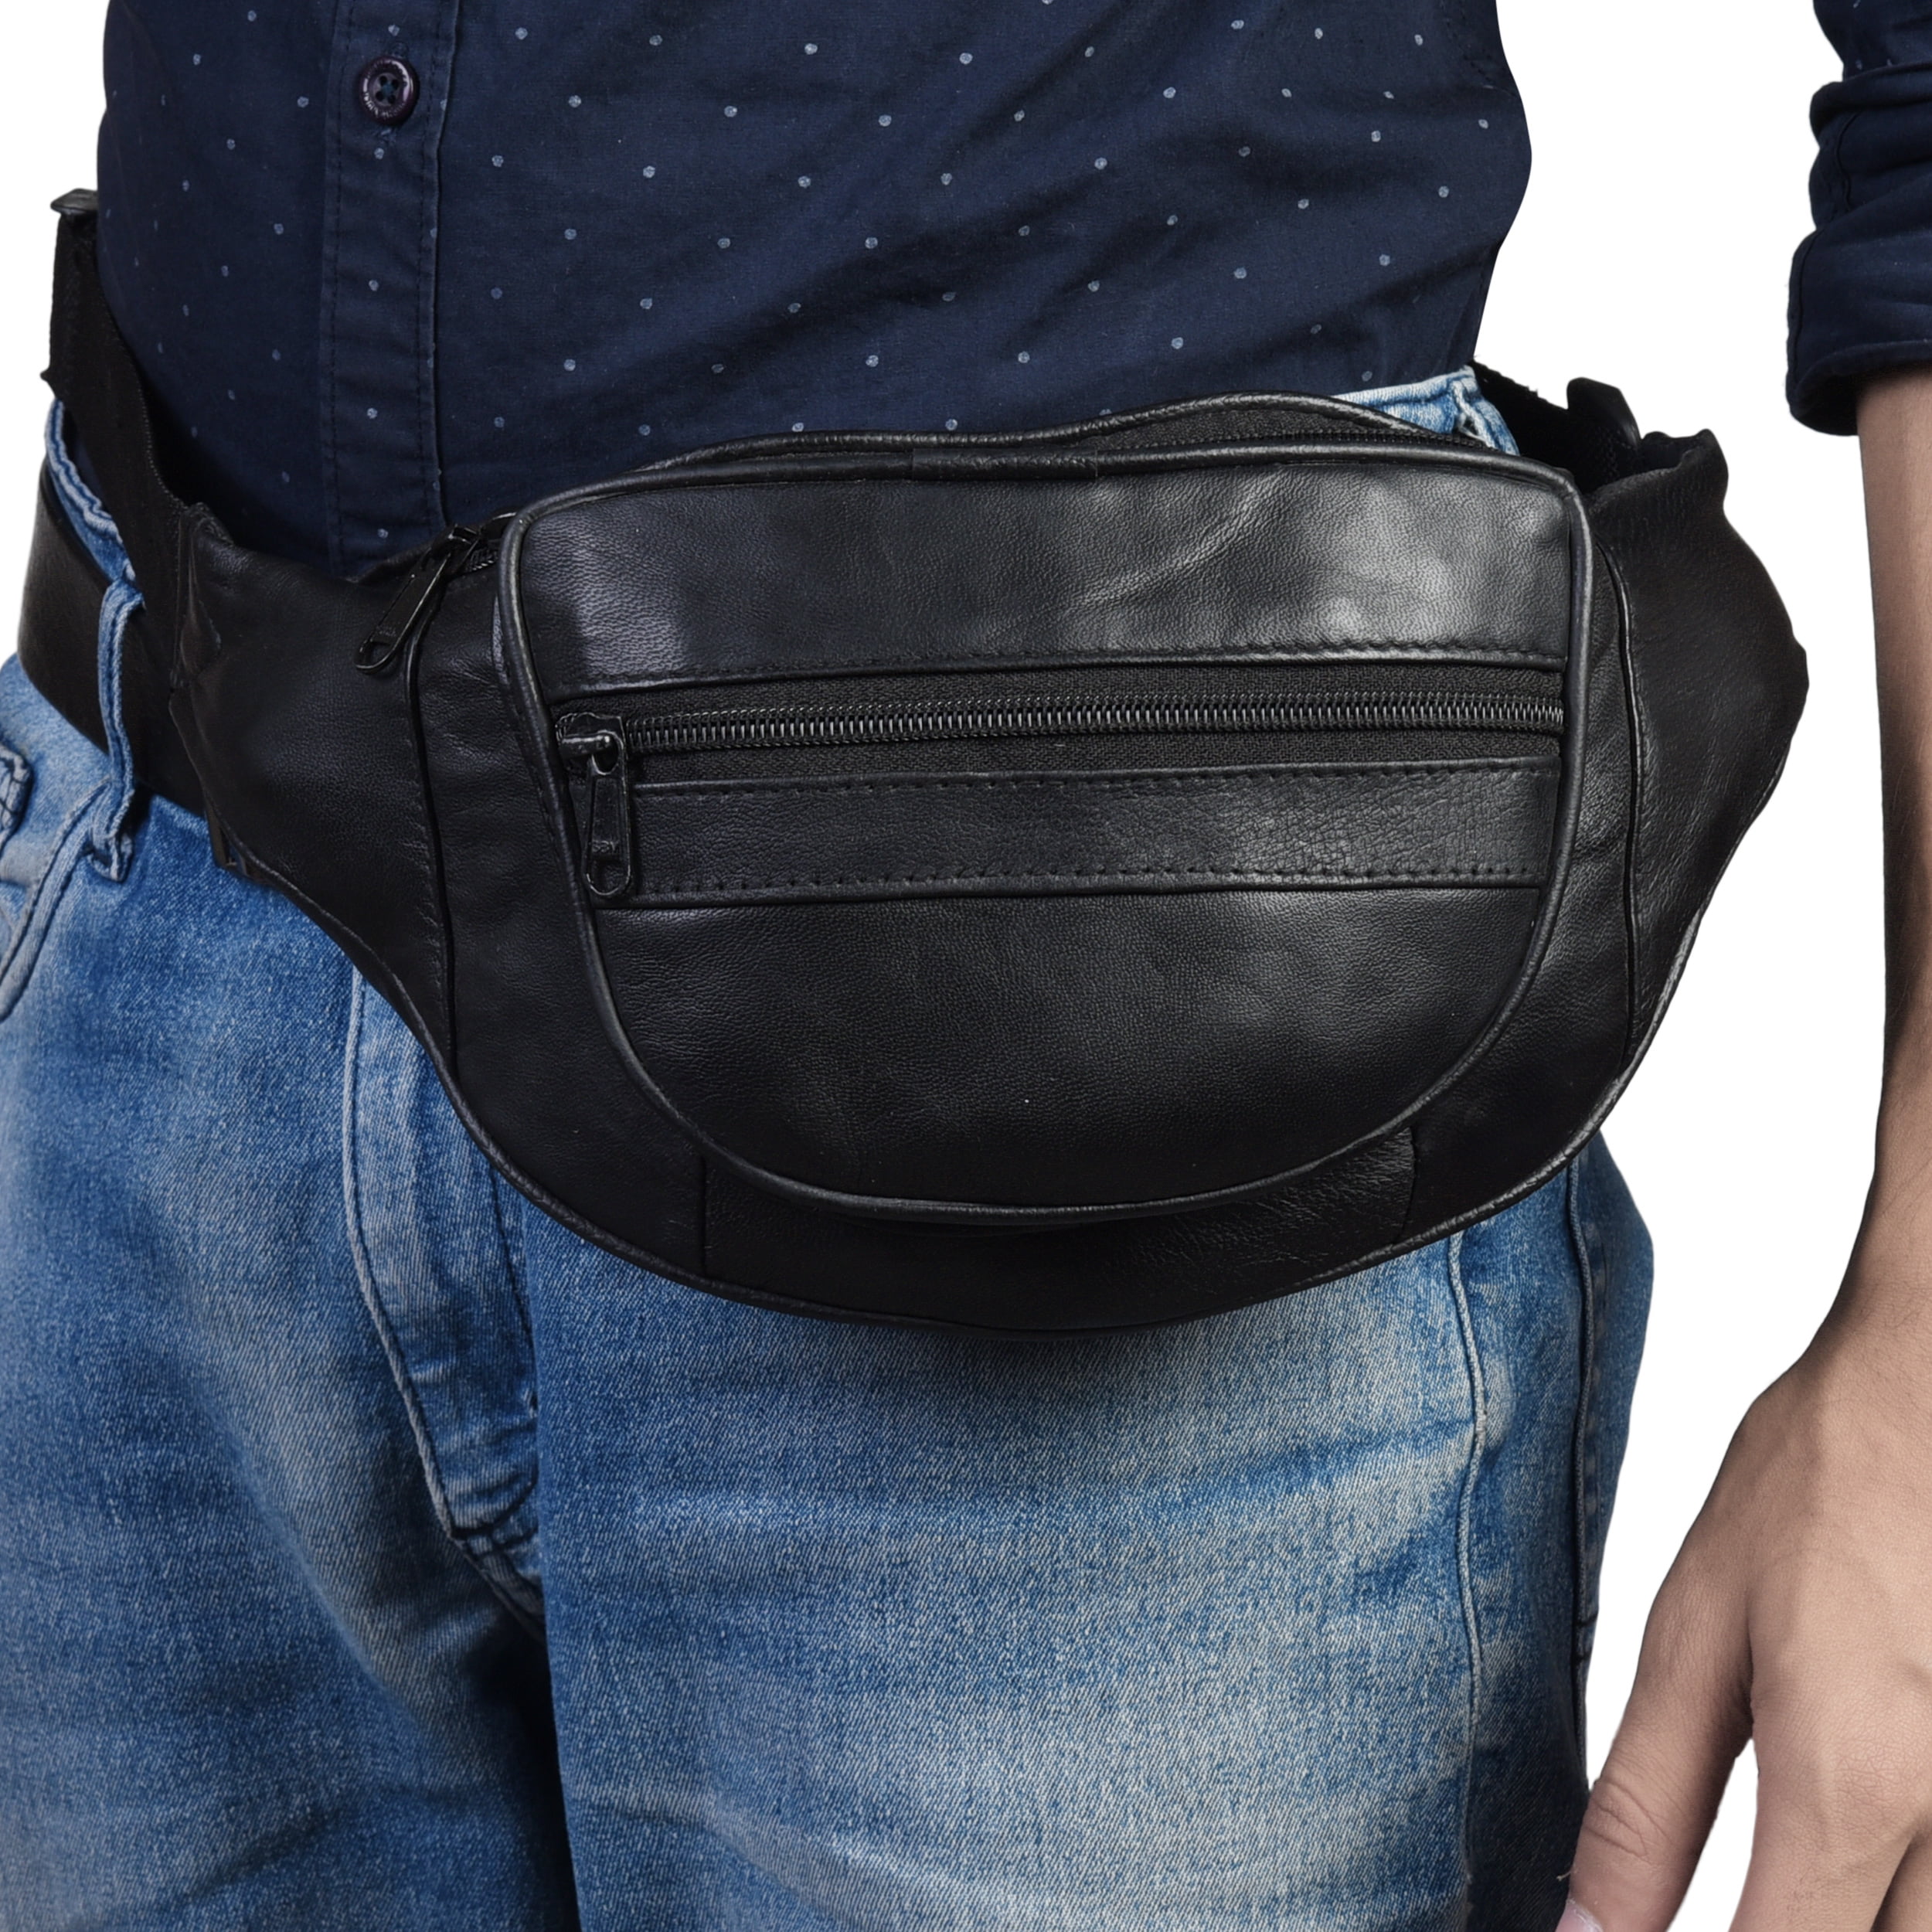 Designer Fanny Pack Leather by Leatherboss Walmart.com